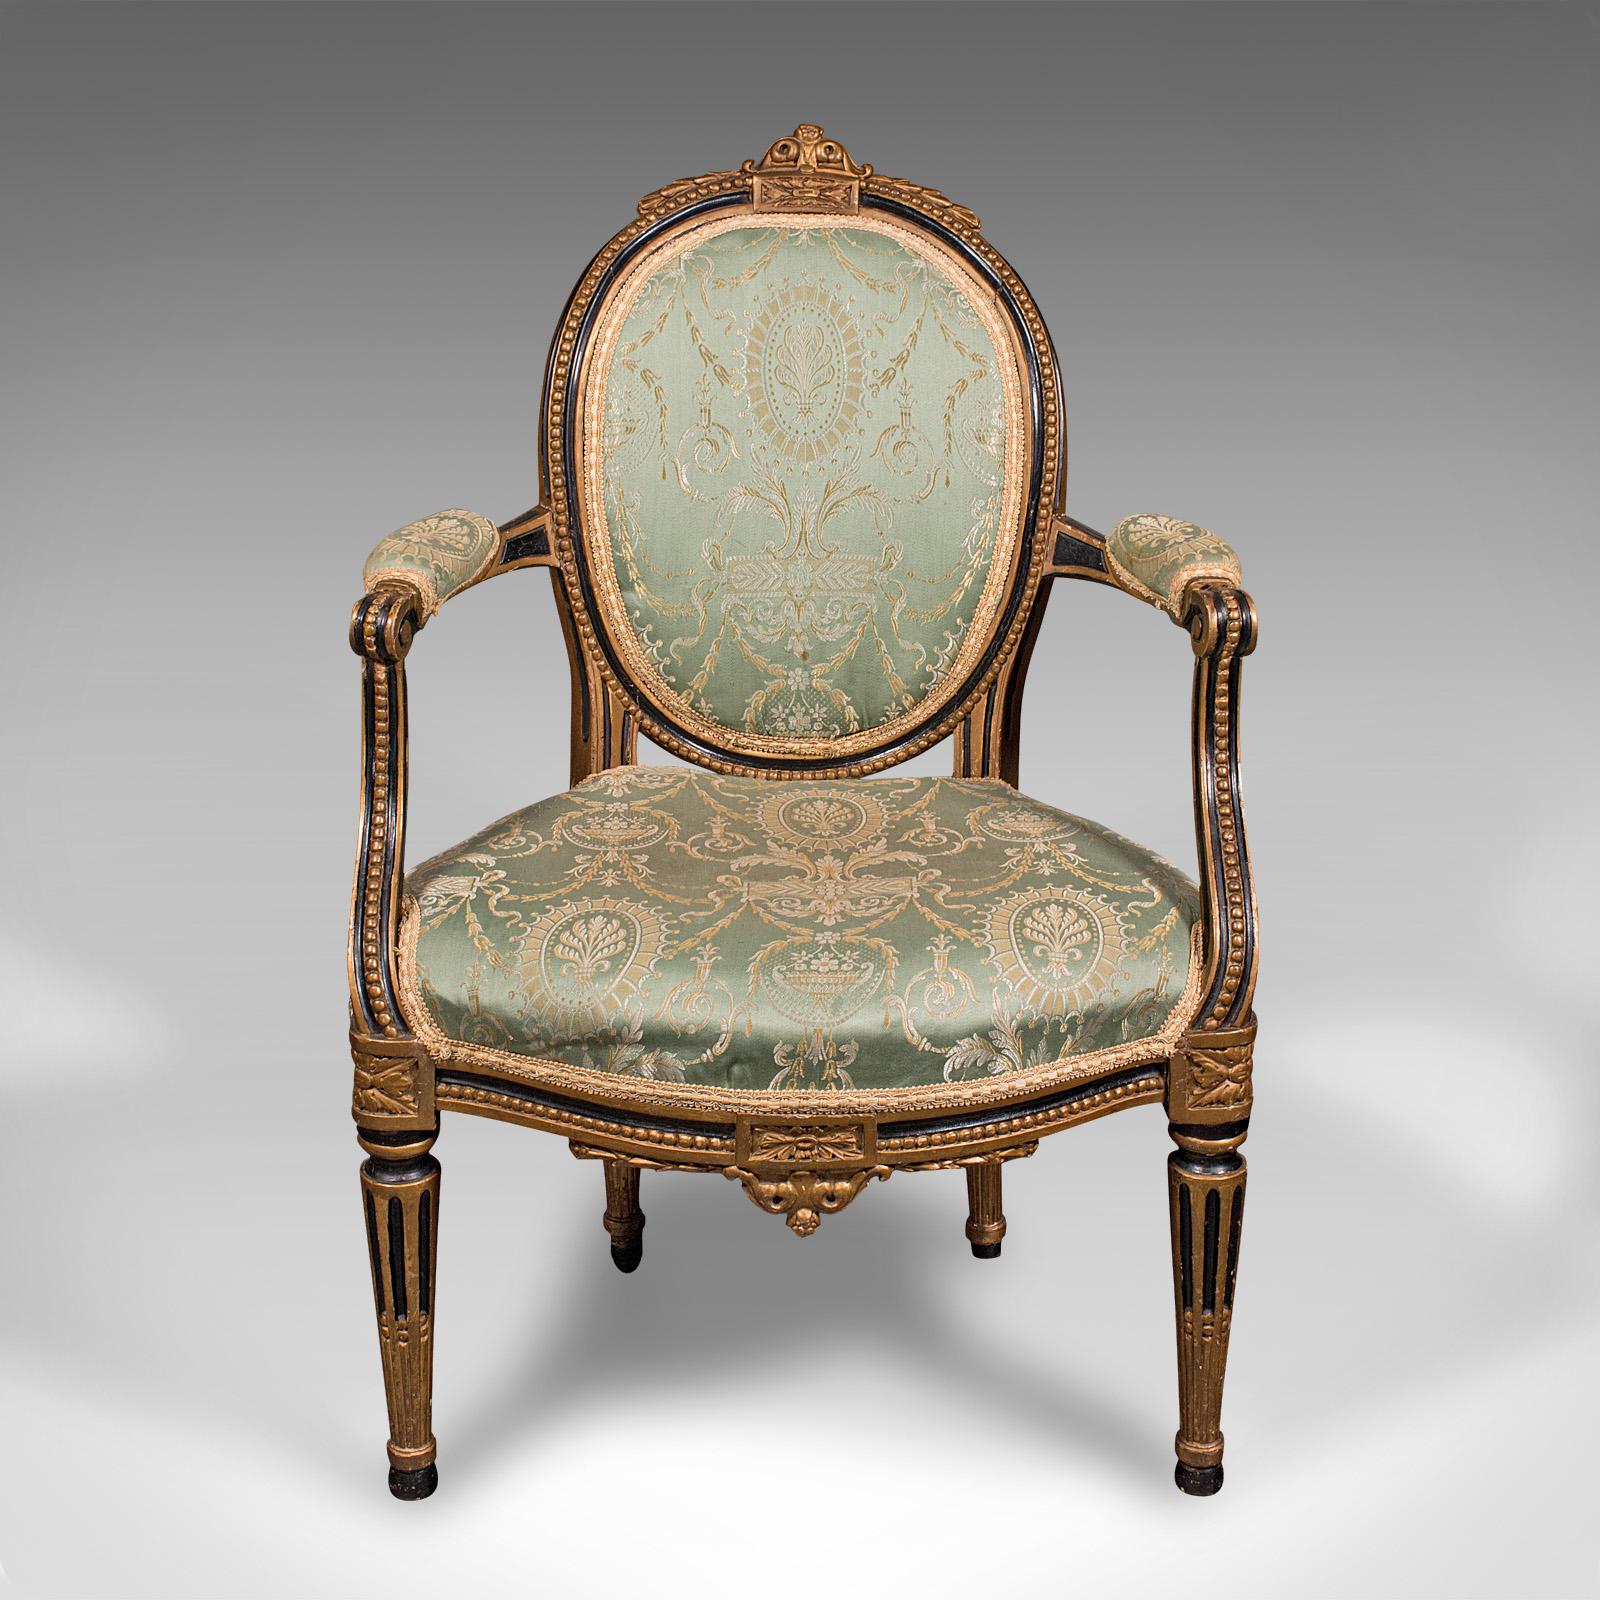 This is an antique dressing room armchair. An English, gilt finished elbow chair with silk cotton upholstery, dating to the Regency period, circa 1820.

Superb elegance, with a wonderful upholstery and gilt finish
Displays a desirable aged patina